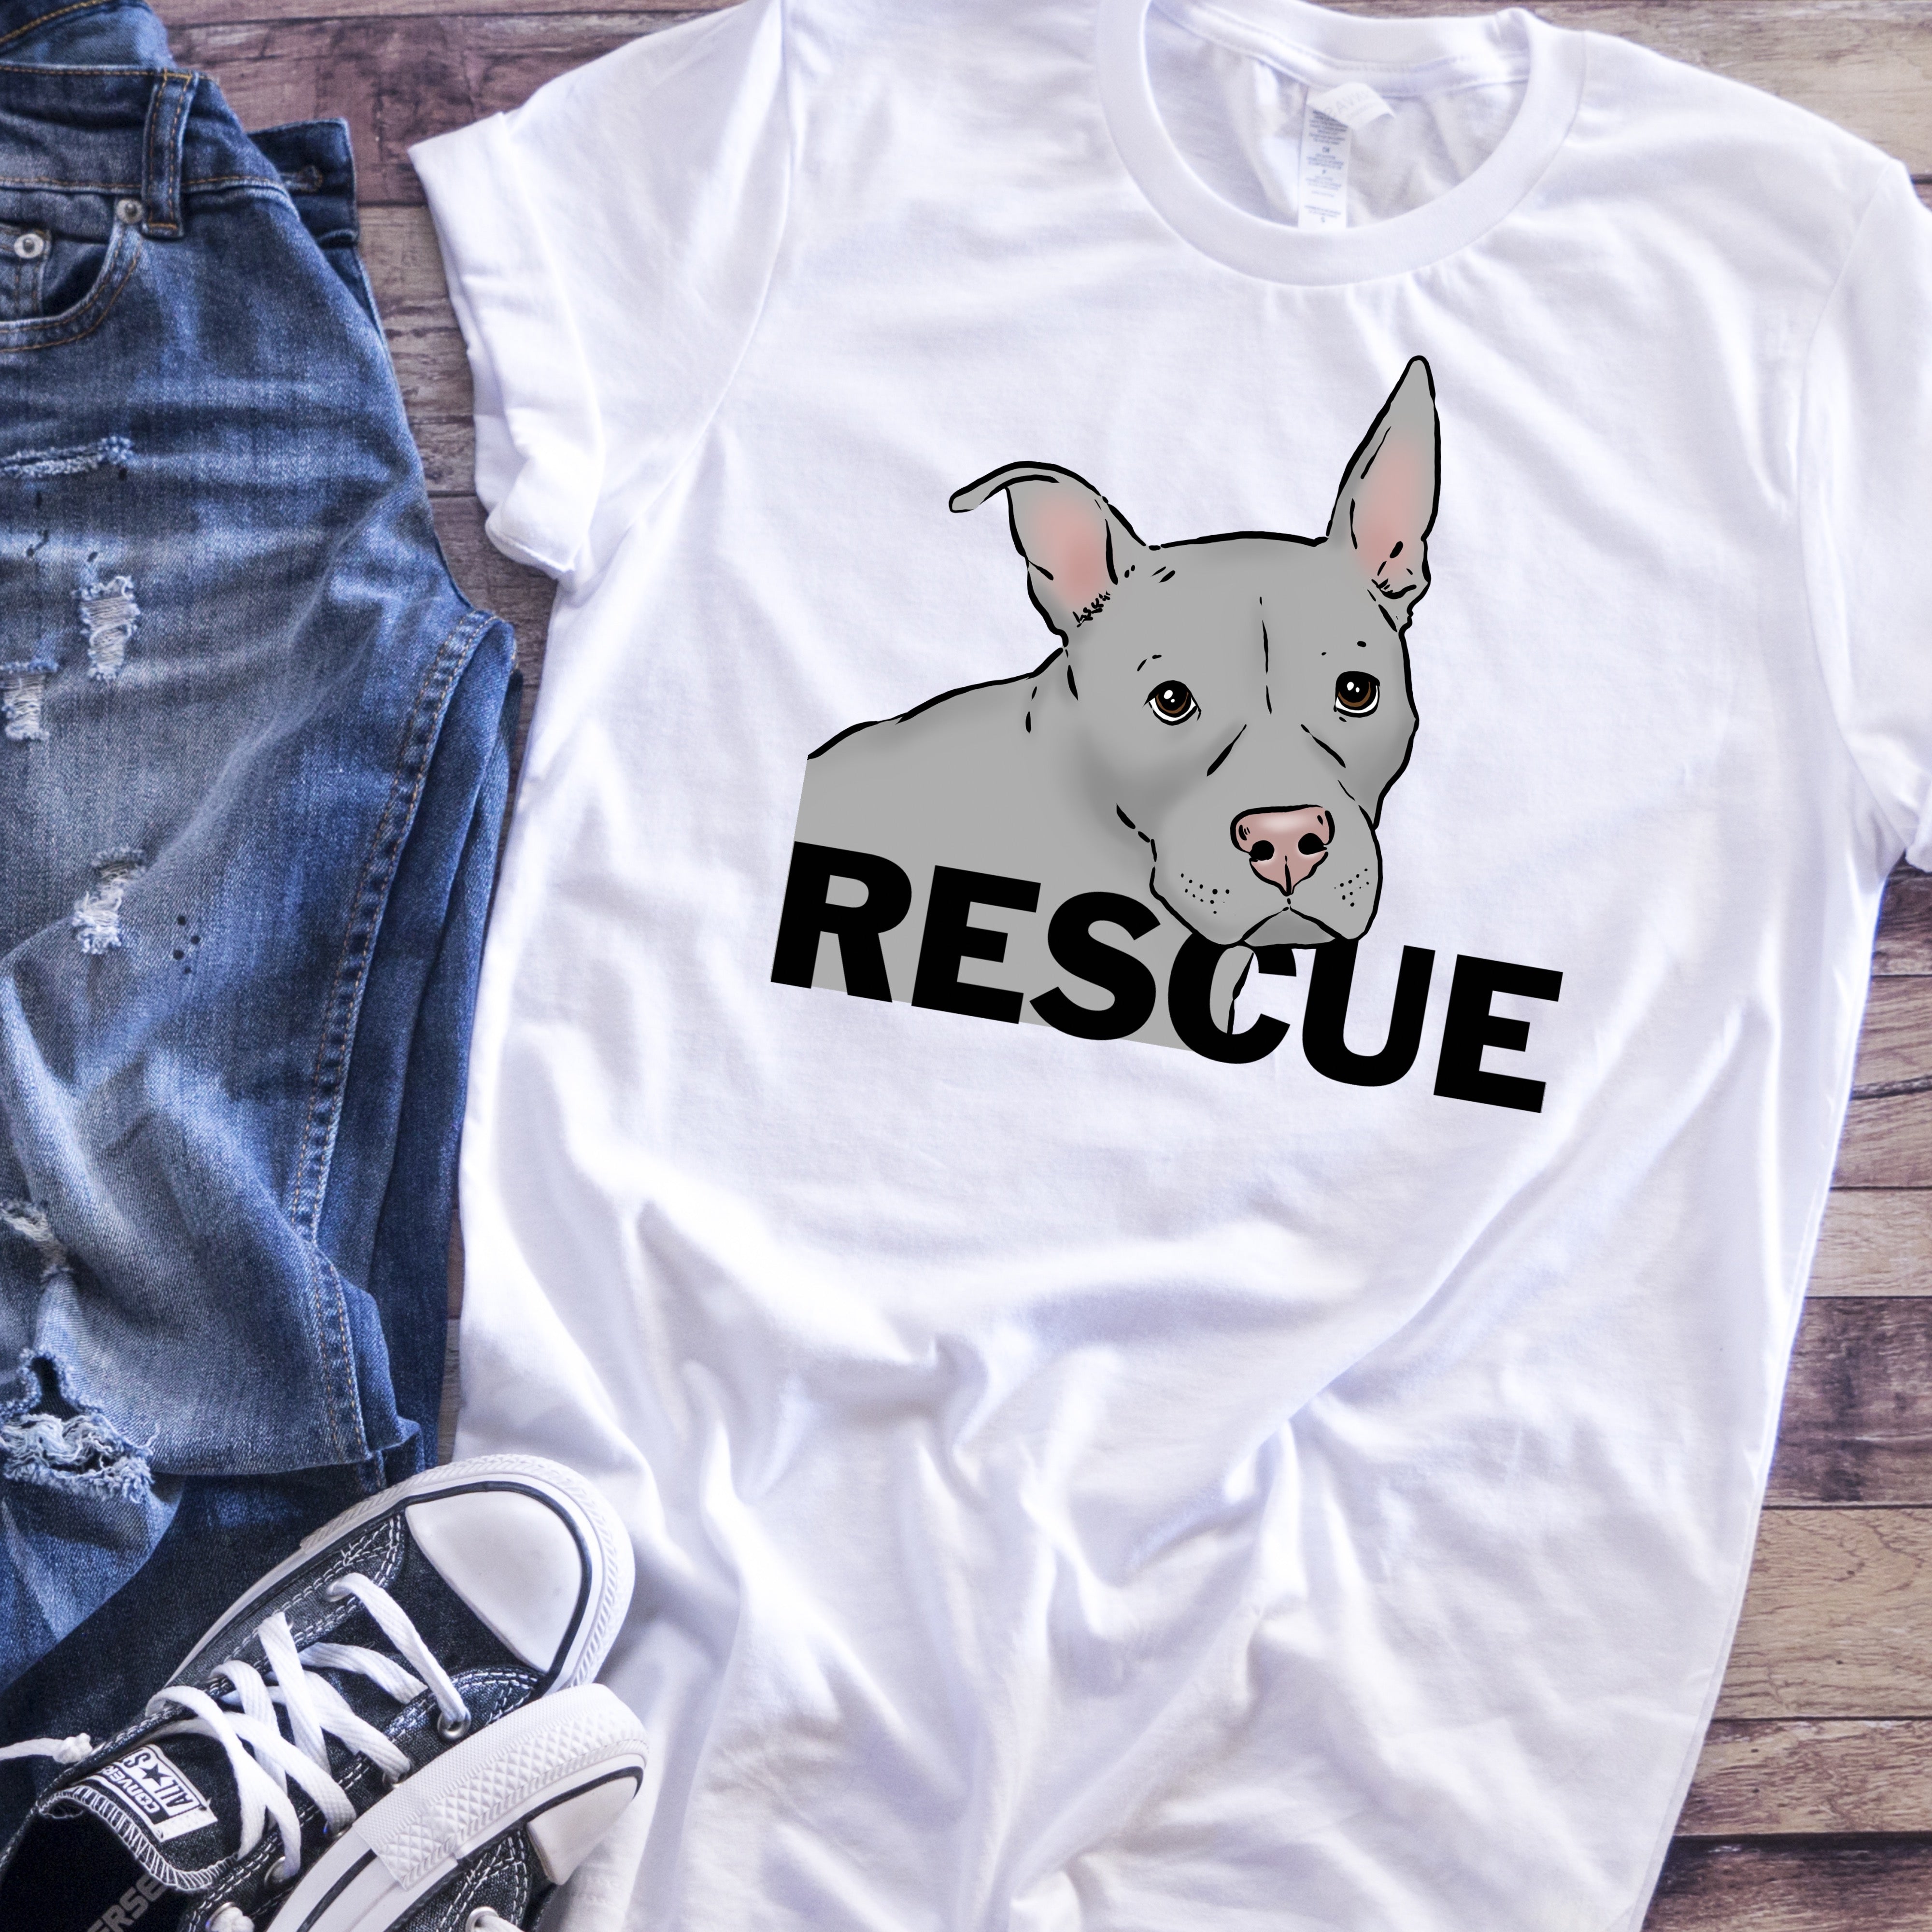 Rescue, Love, Repeat Pit Bull Drawings T-Shirt White / XL